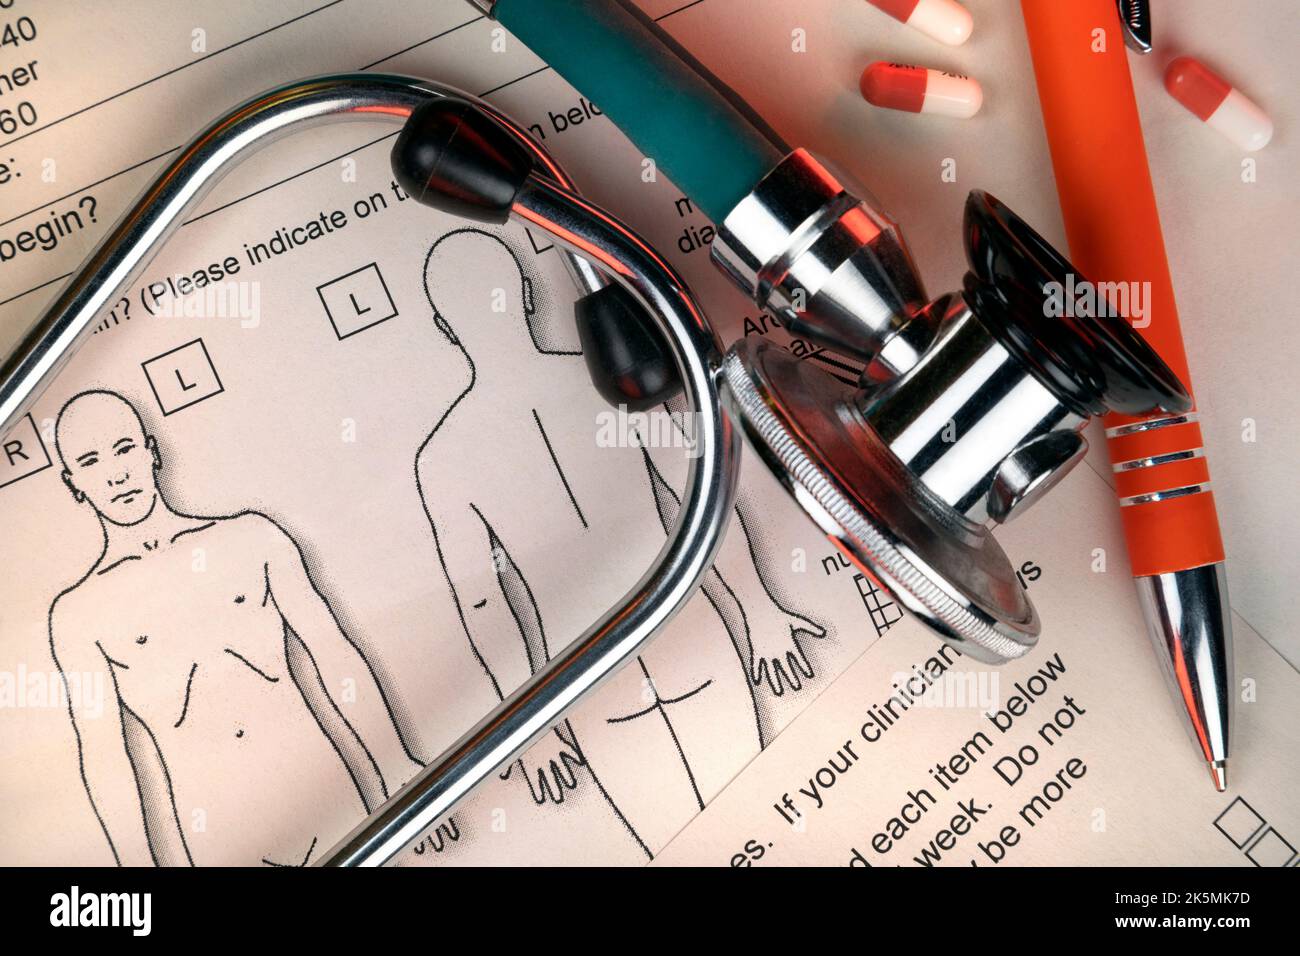 Medicine - Stethoscope and clinicians notes on a doctors desk. Stock Photo